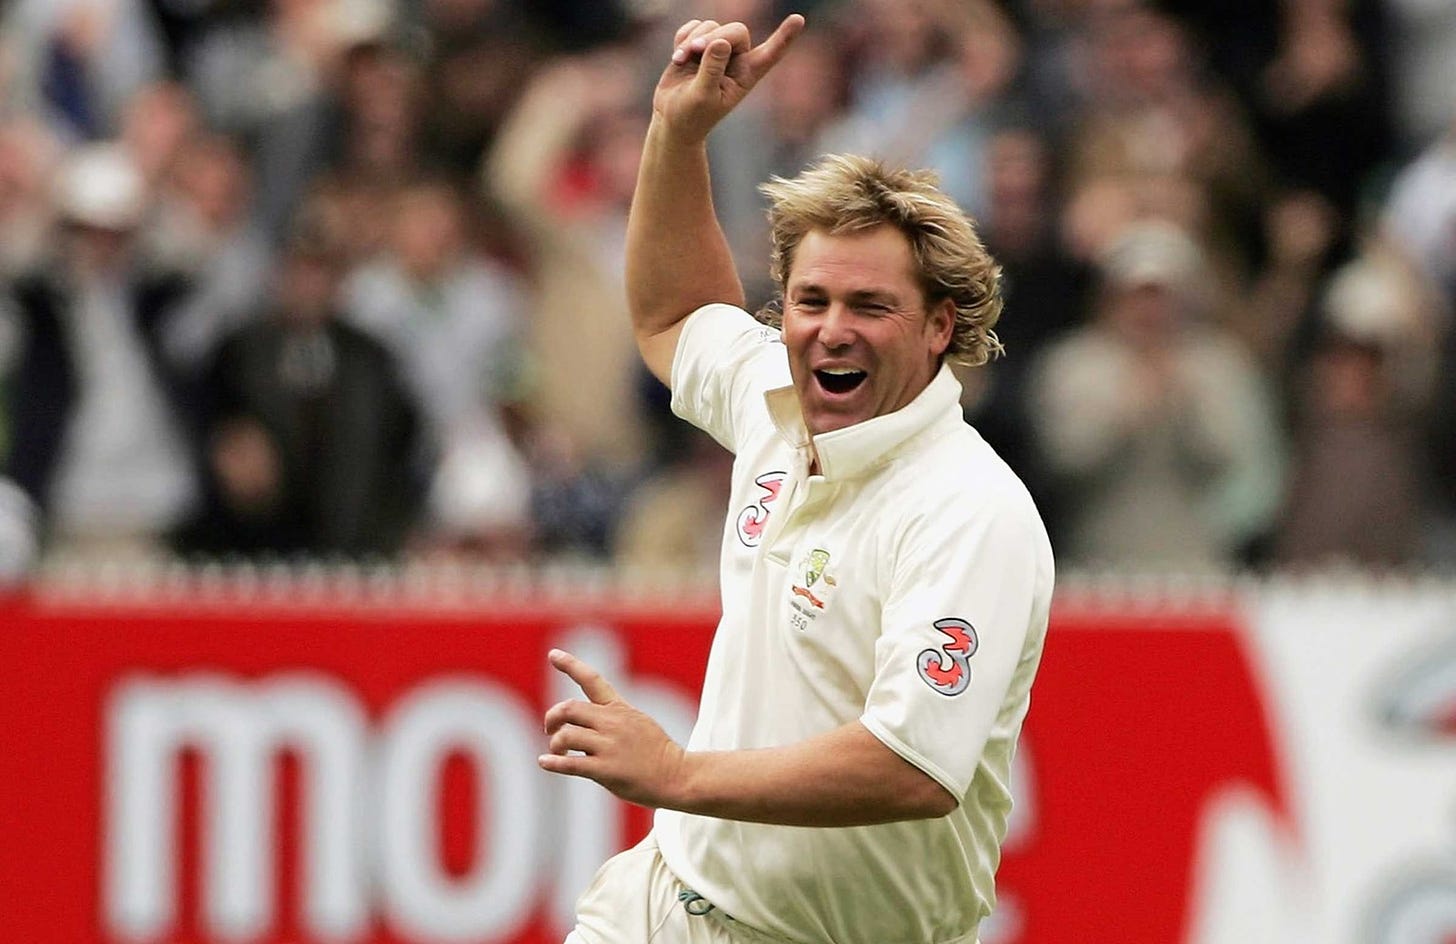 Shane Warne&amp;#39;s top wickets countdown concludes | cricket.com.au